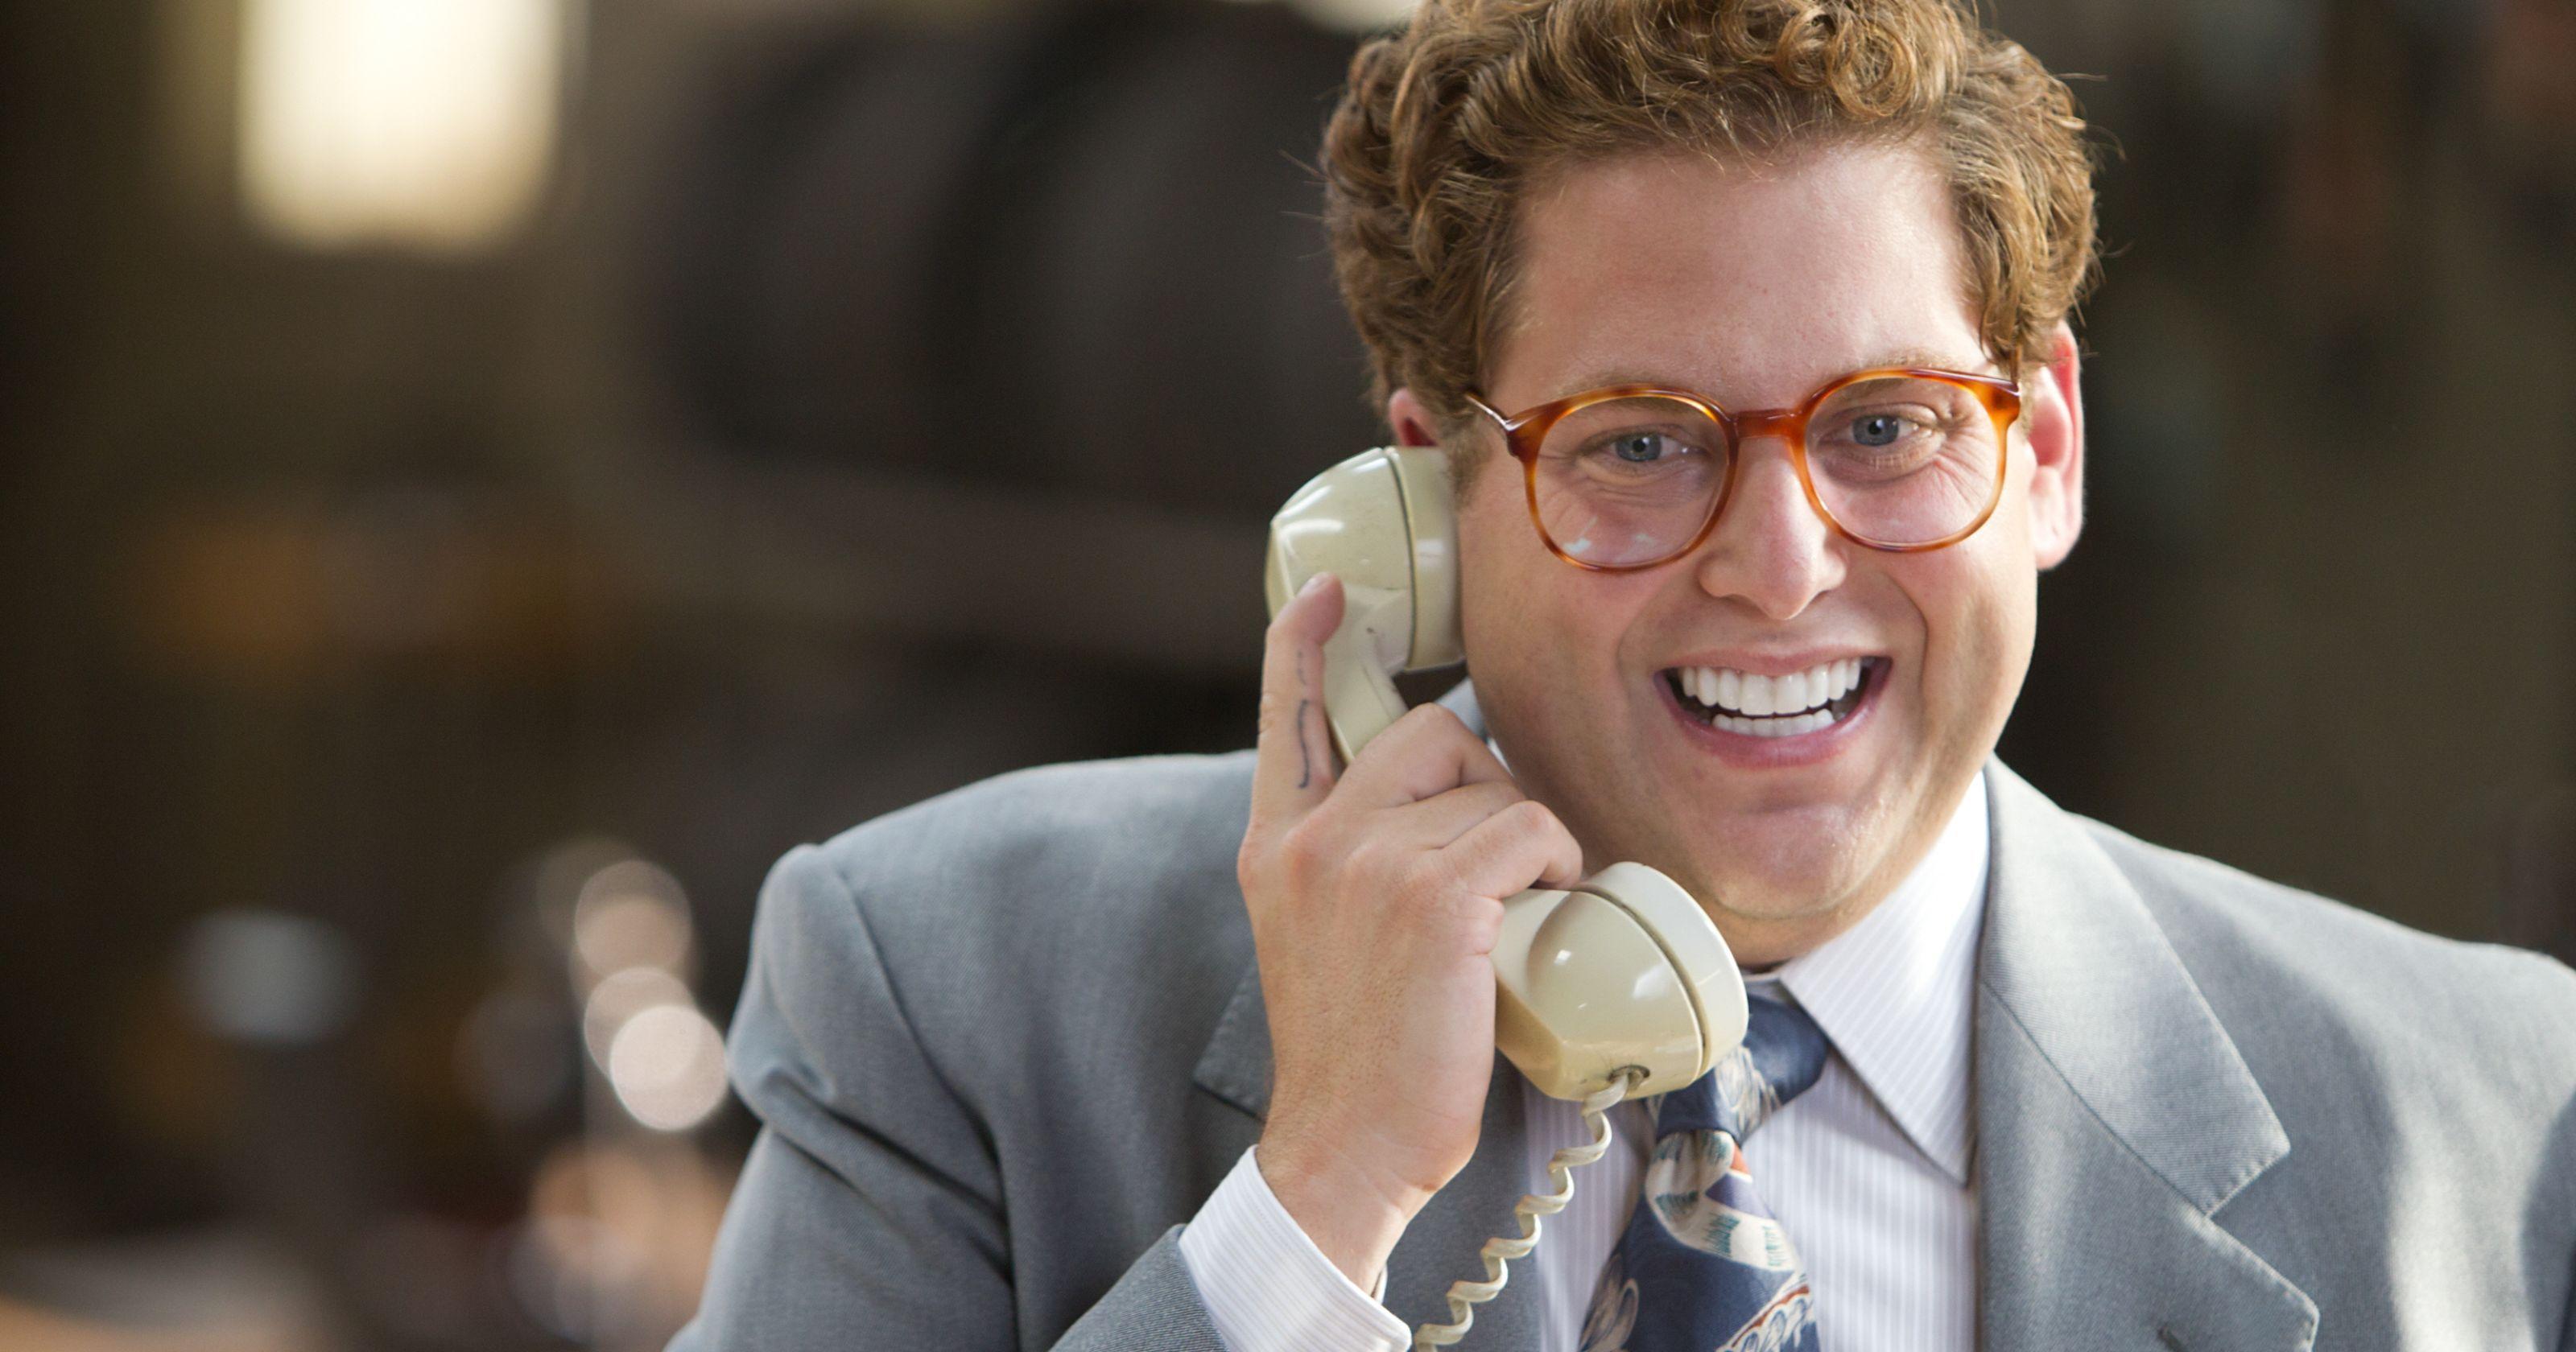 Little known facts about Jonah Hill